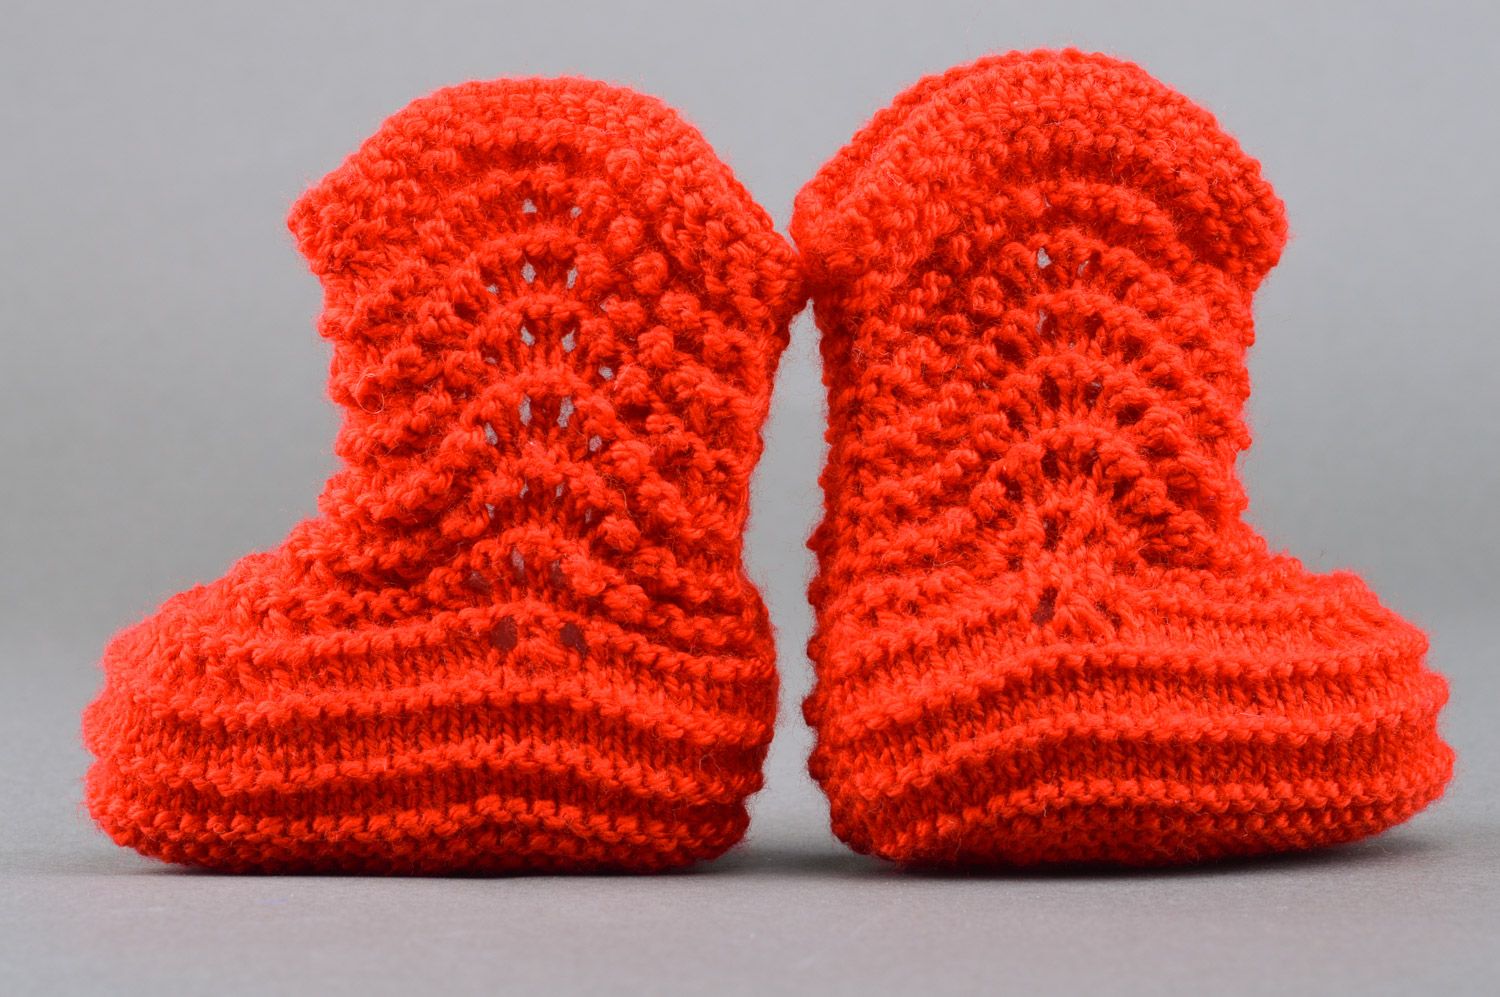 Handmade red lace high baby booties knitted of semi-woolen threads photo 2